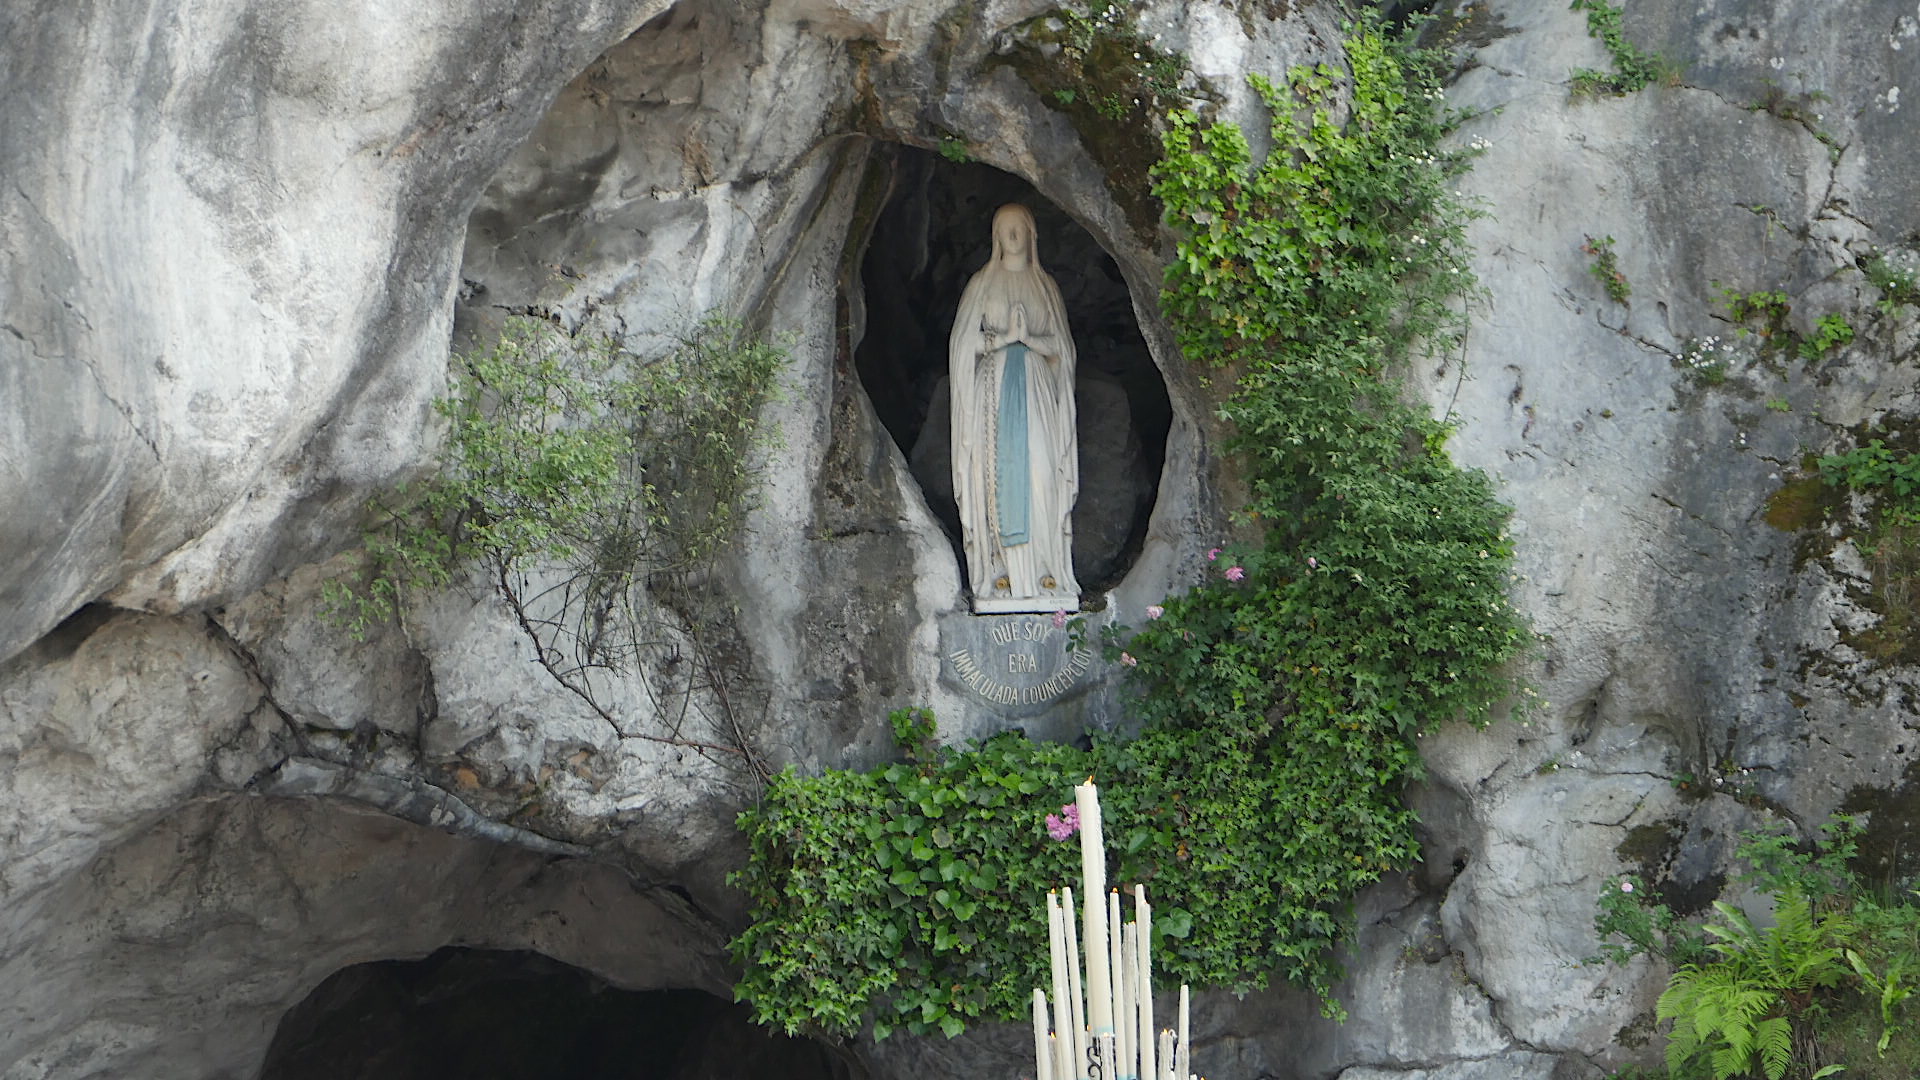 Close up of the Grotto, with the statue of the Virgin Mary. This is the spot where Bernadette and the Virgin met.